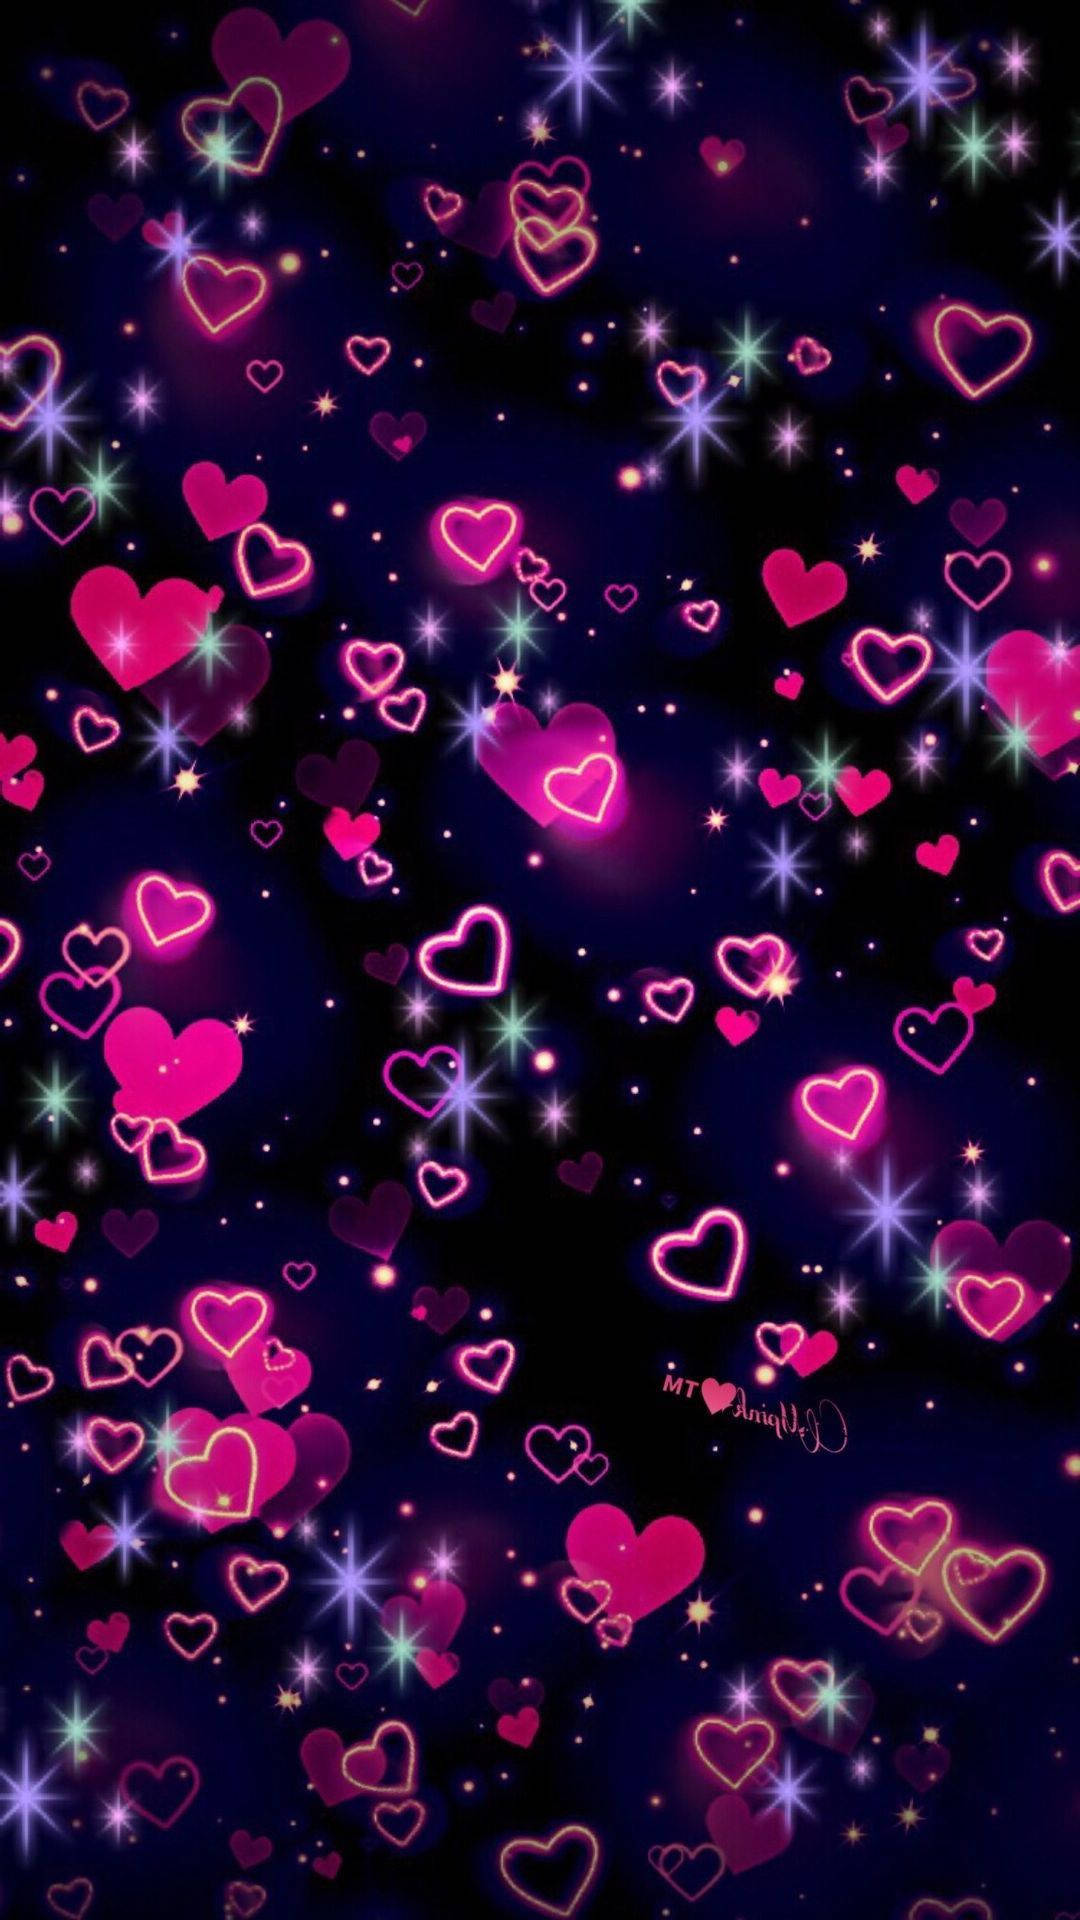 Y2k Hearts In Glowing Pink Colour Wallpaper